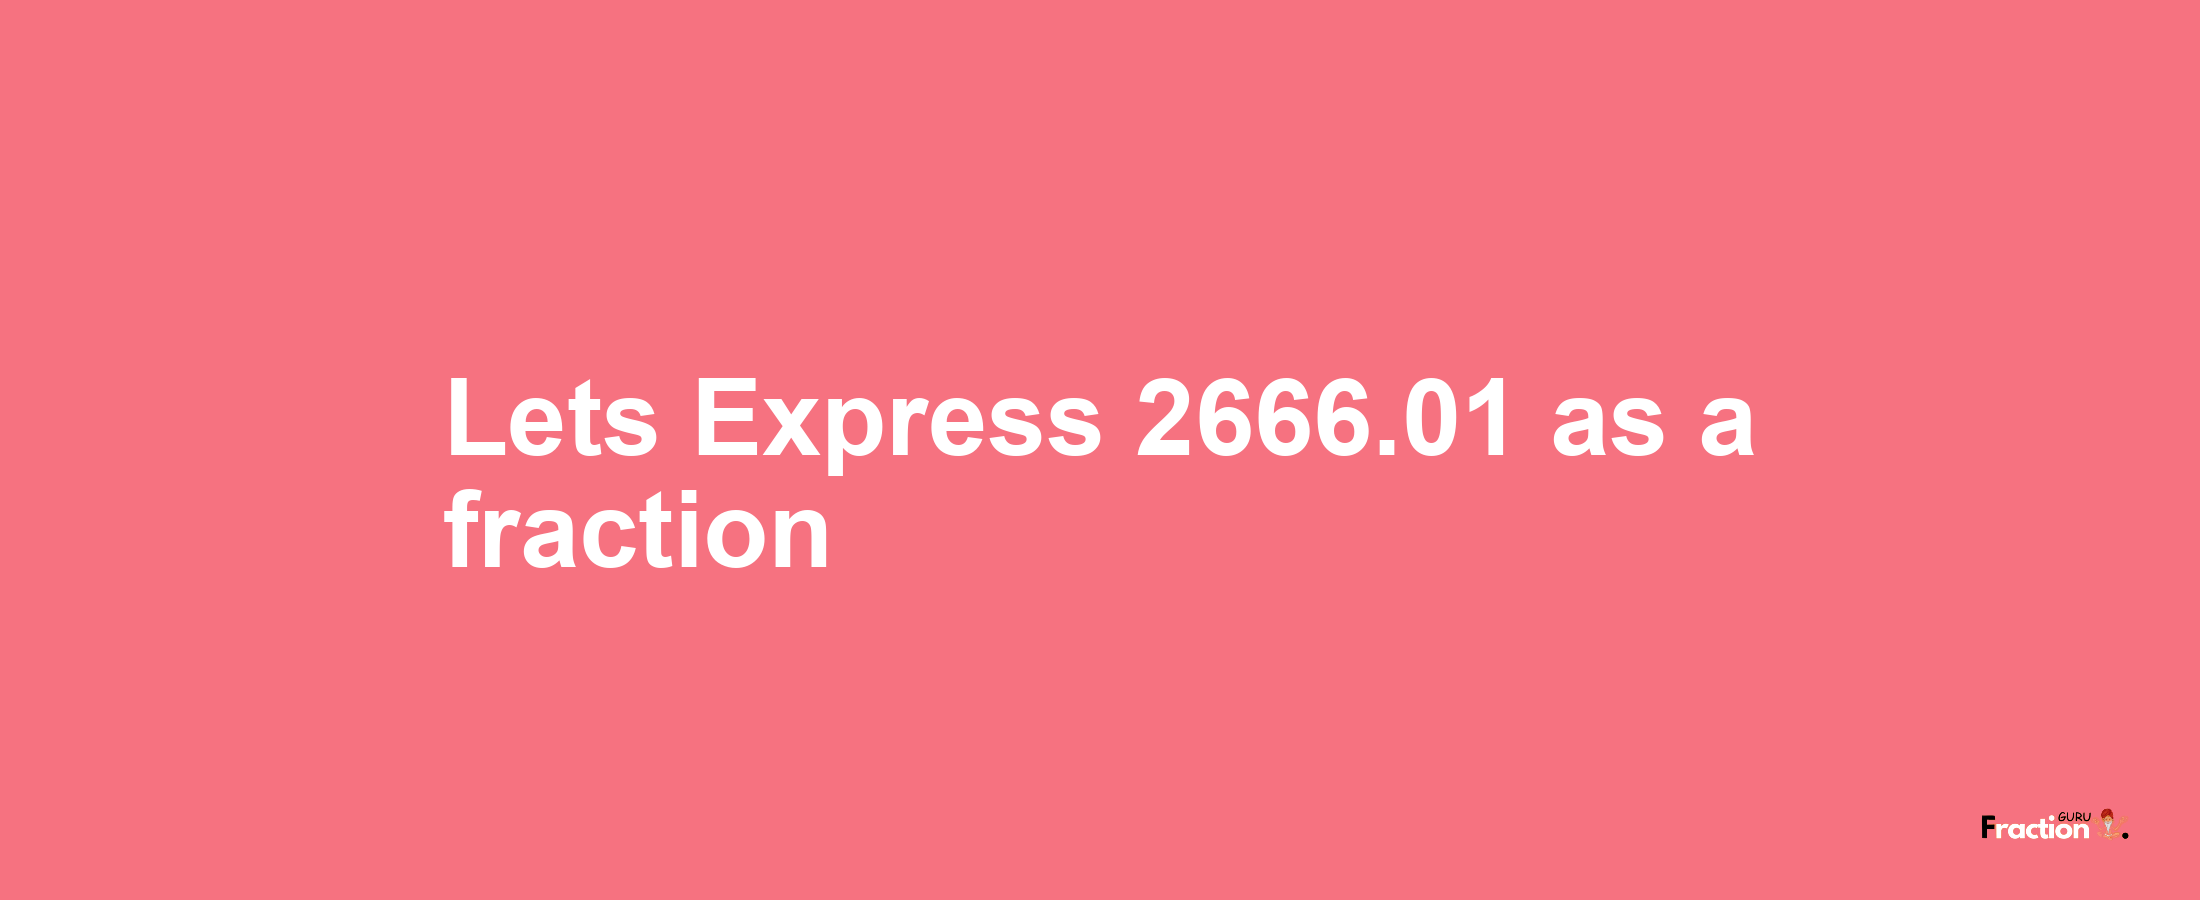 Lets Express 2666.01 as afraction